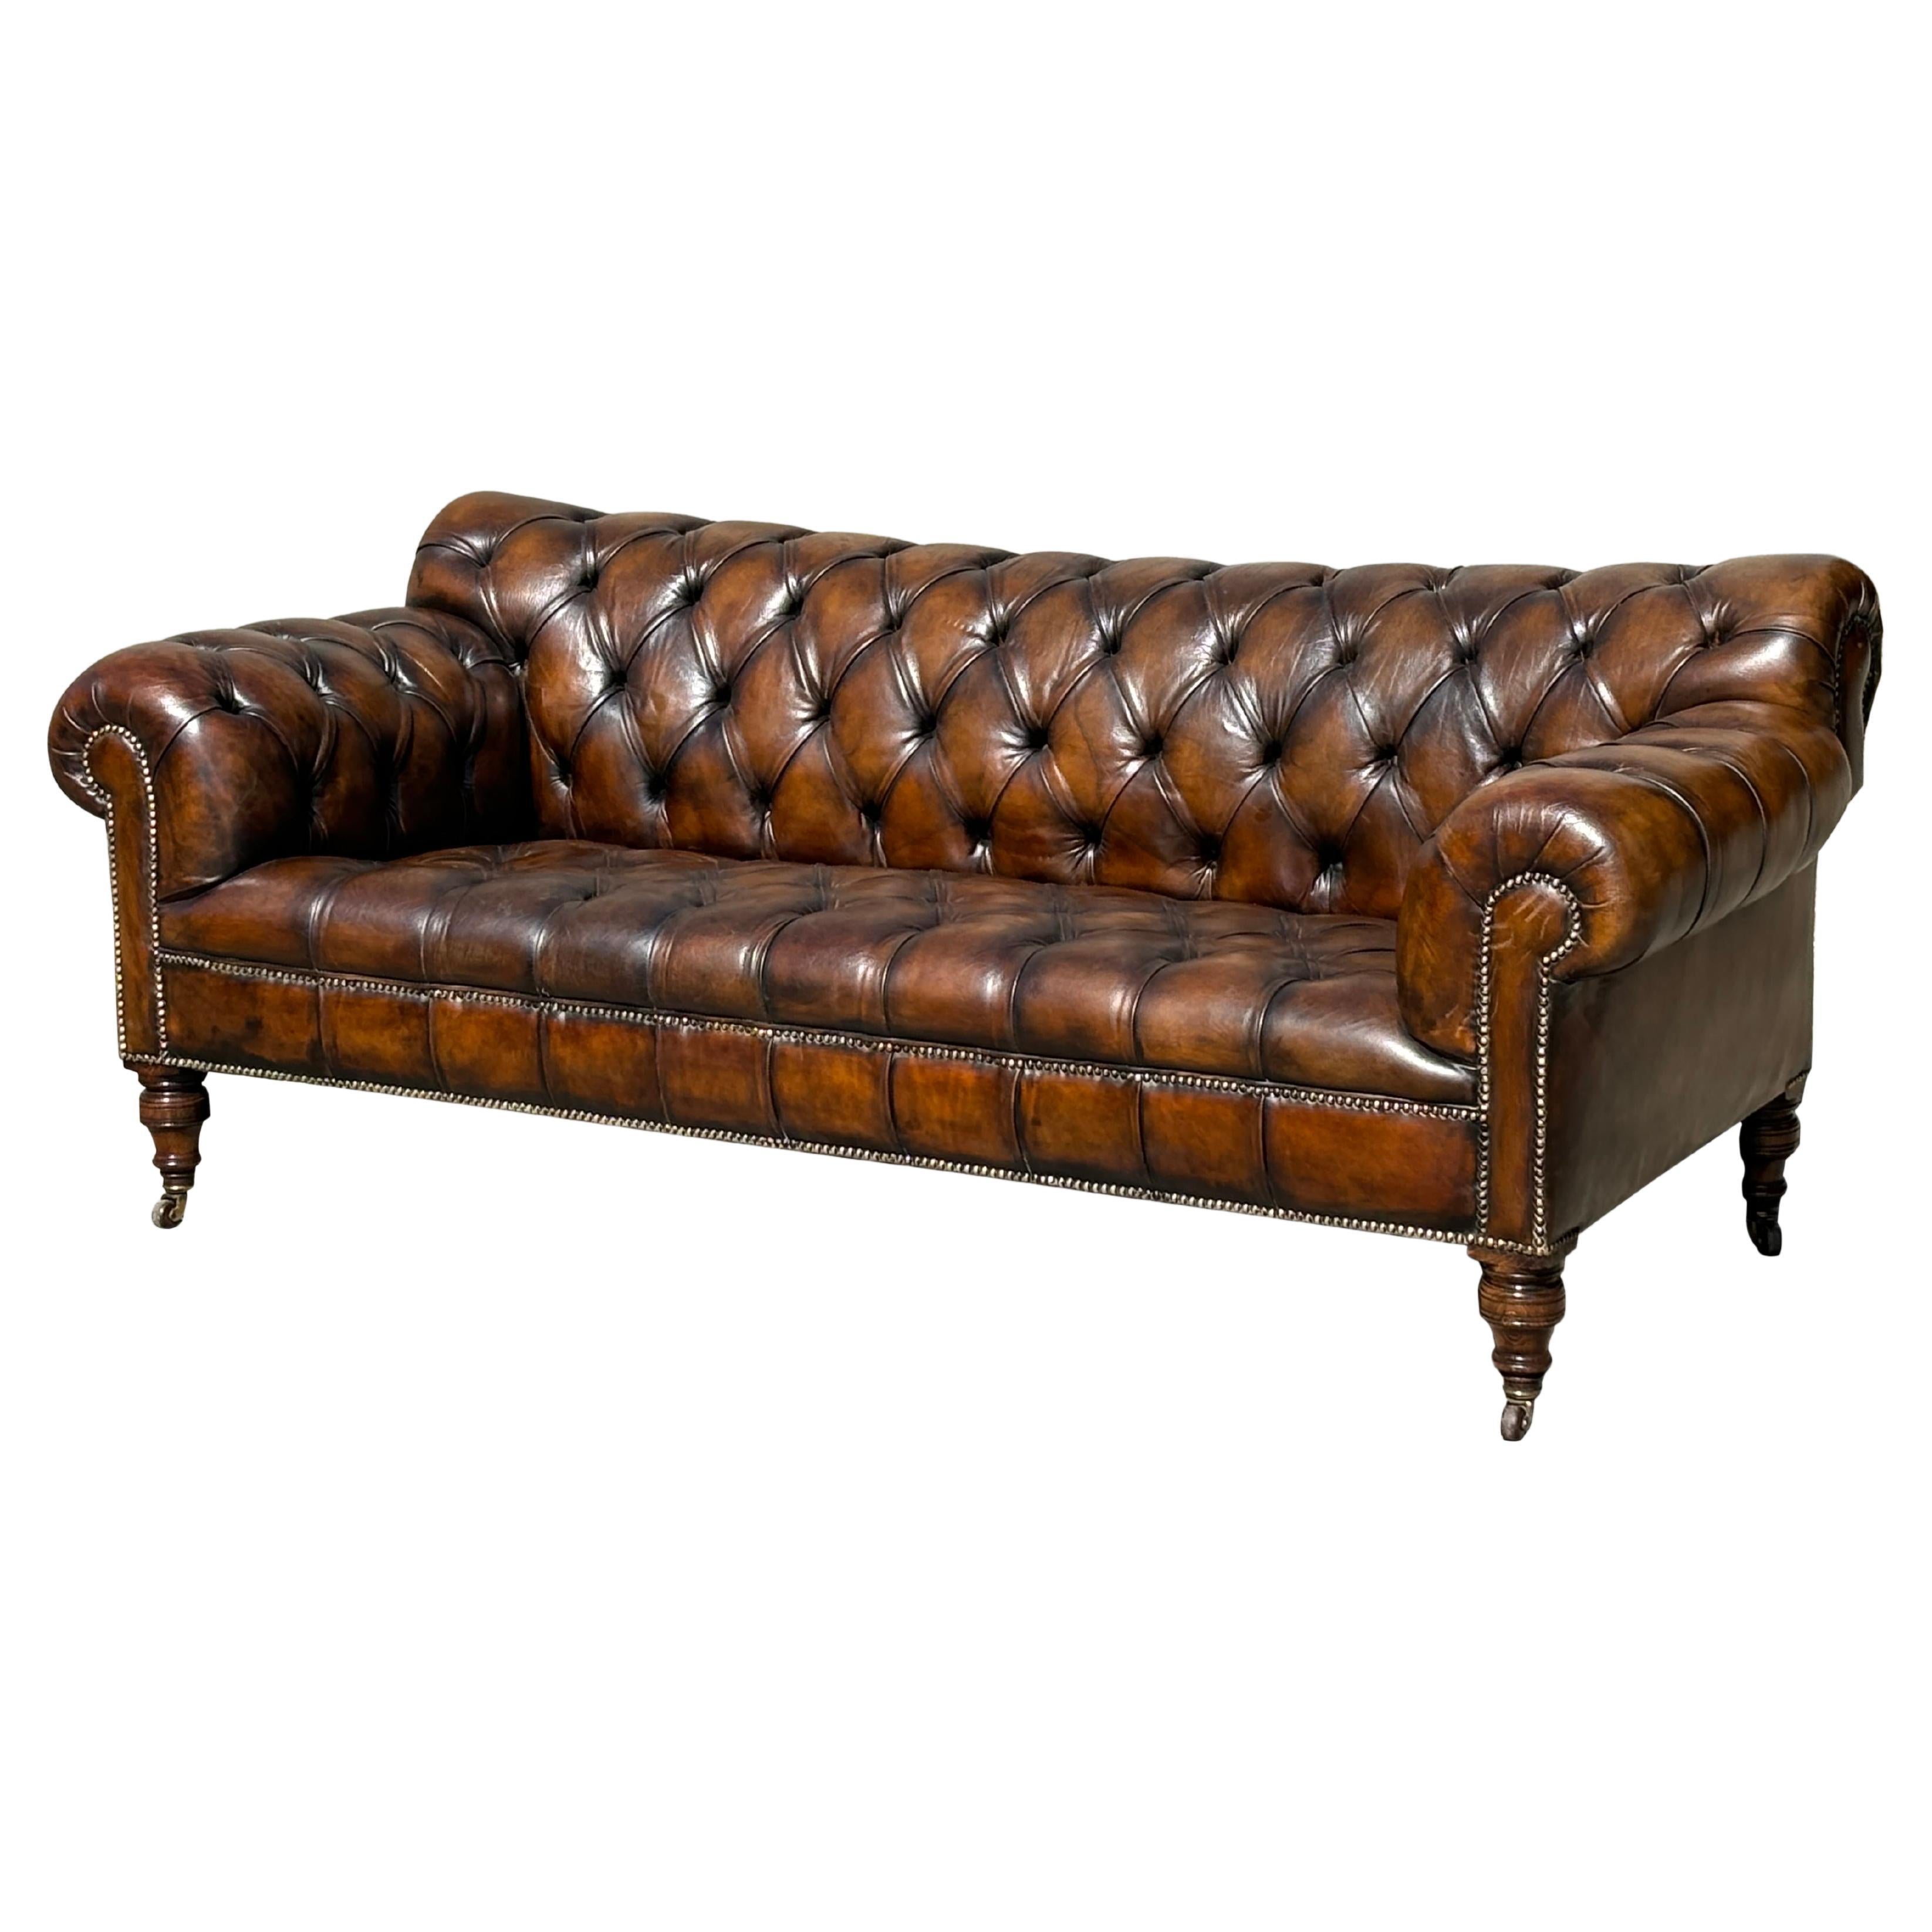 19th Century, Victorian Period Leather Chesterfield